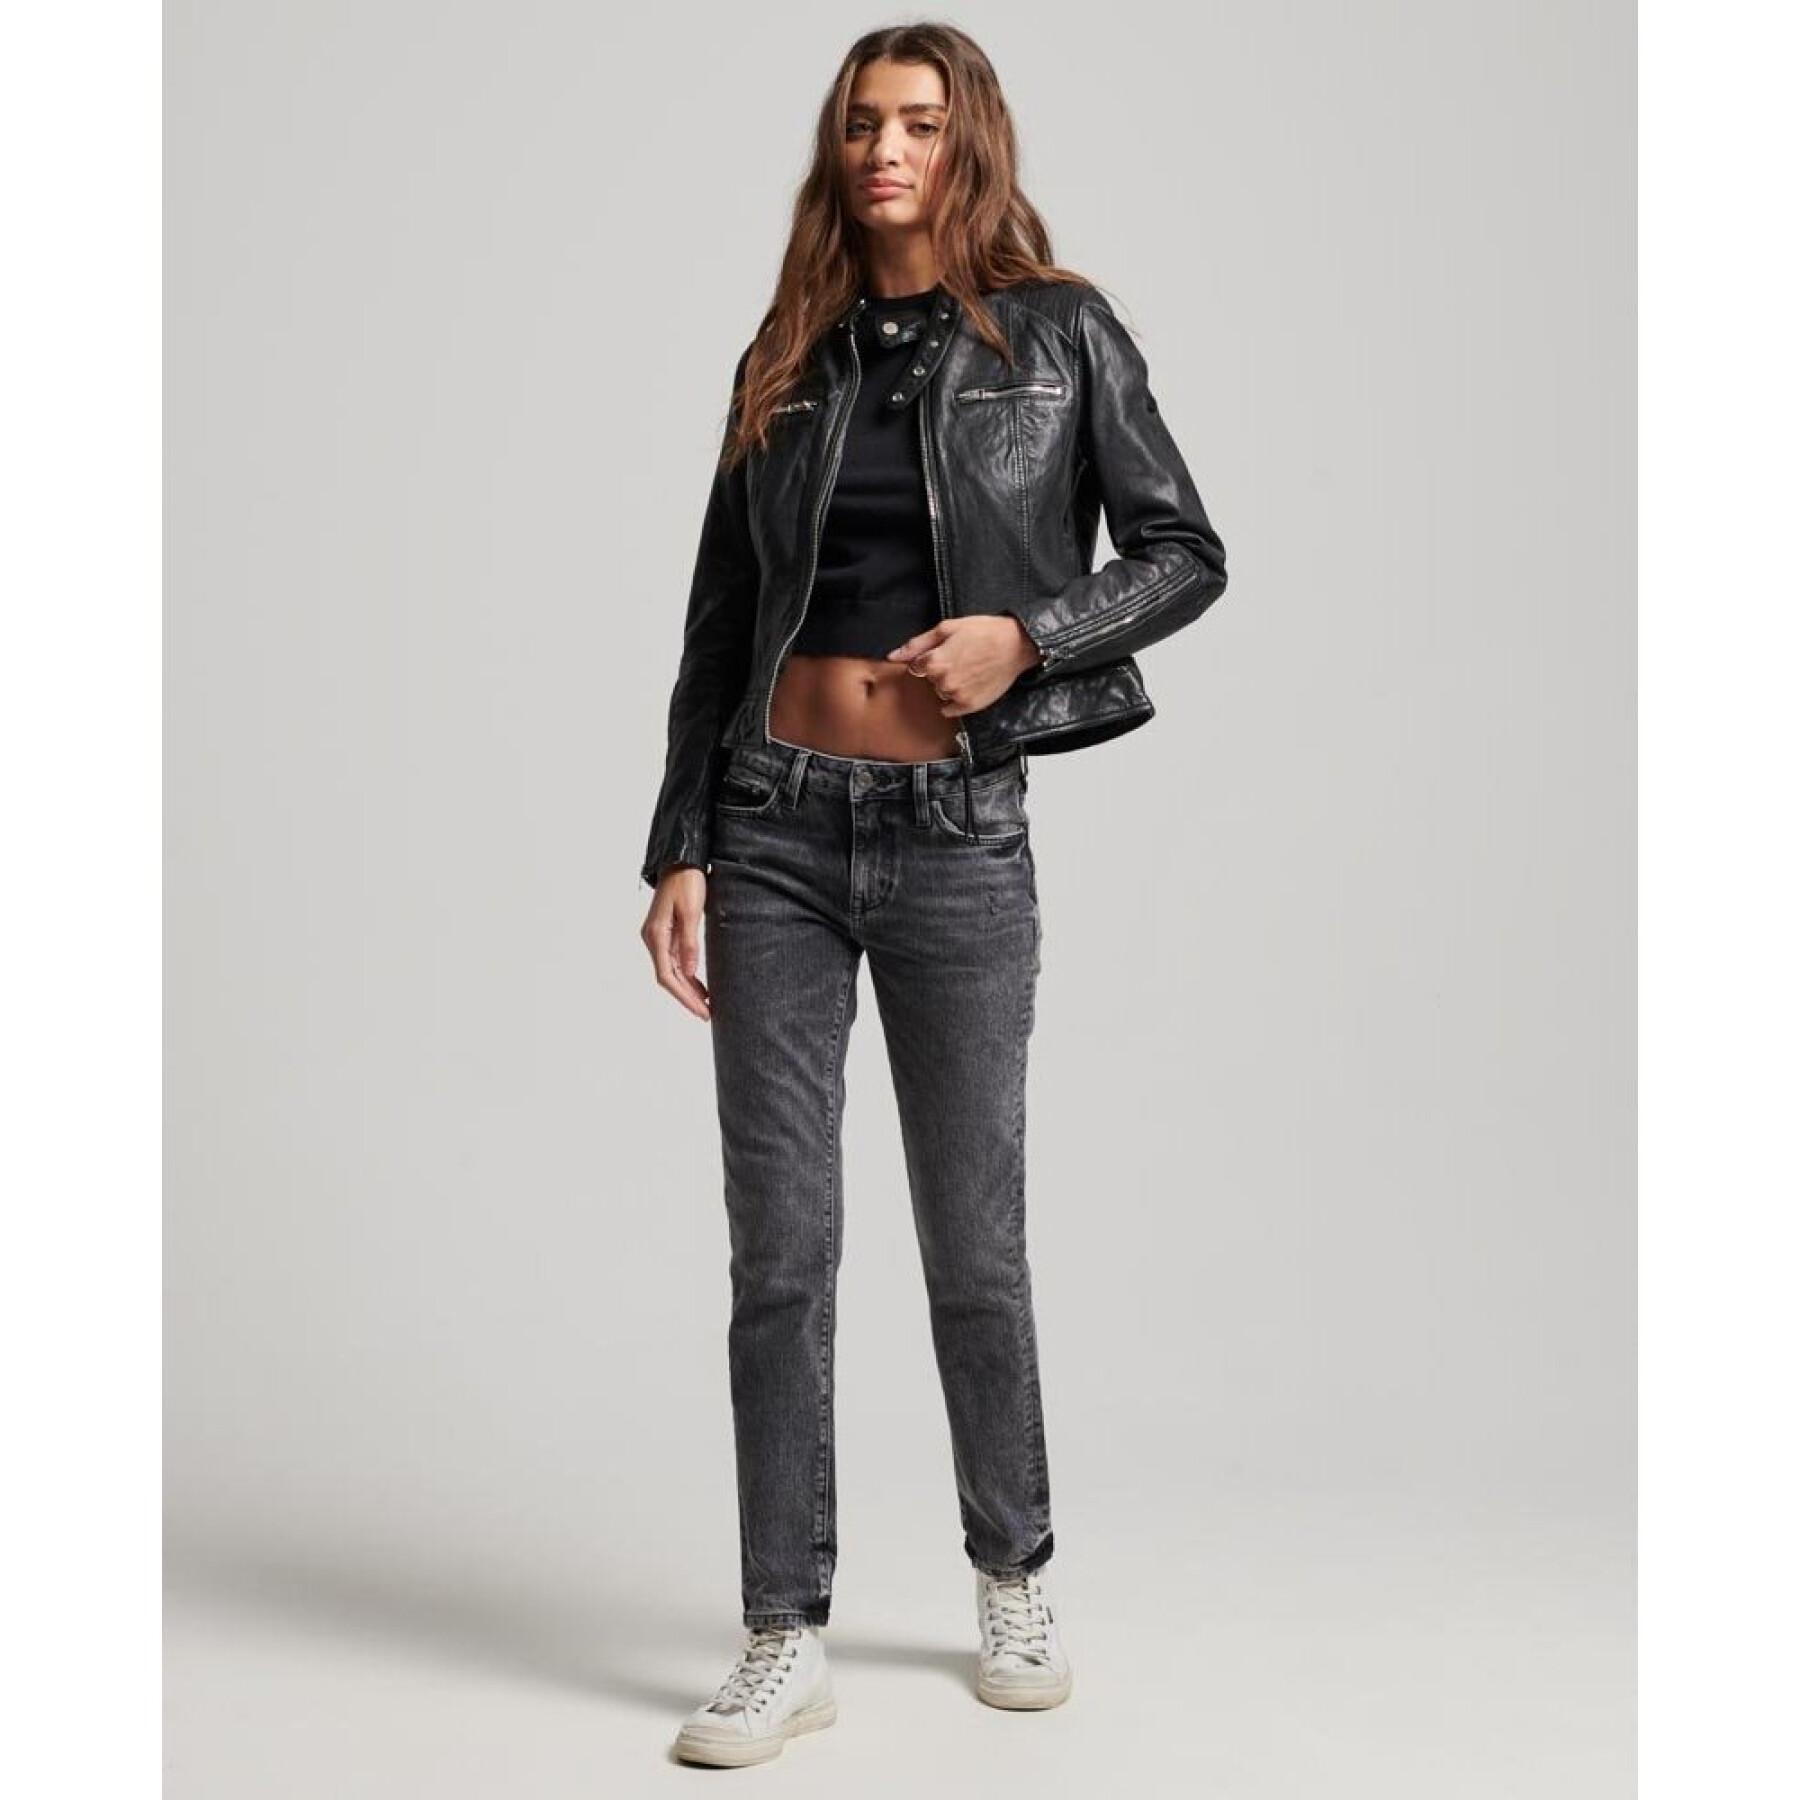 Women's tailored leather jacket Superdry Racer